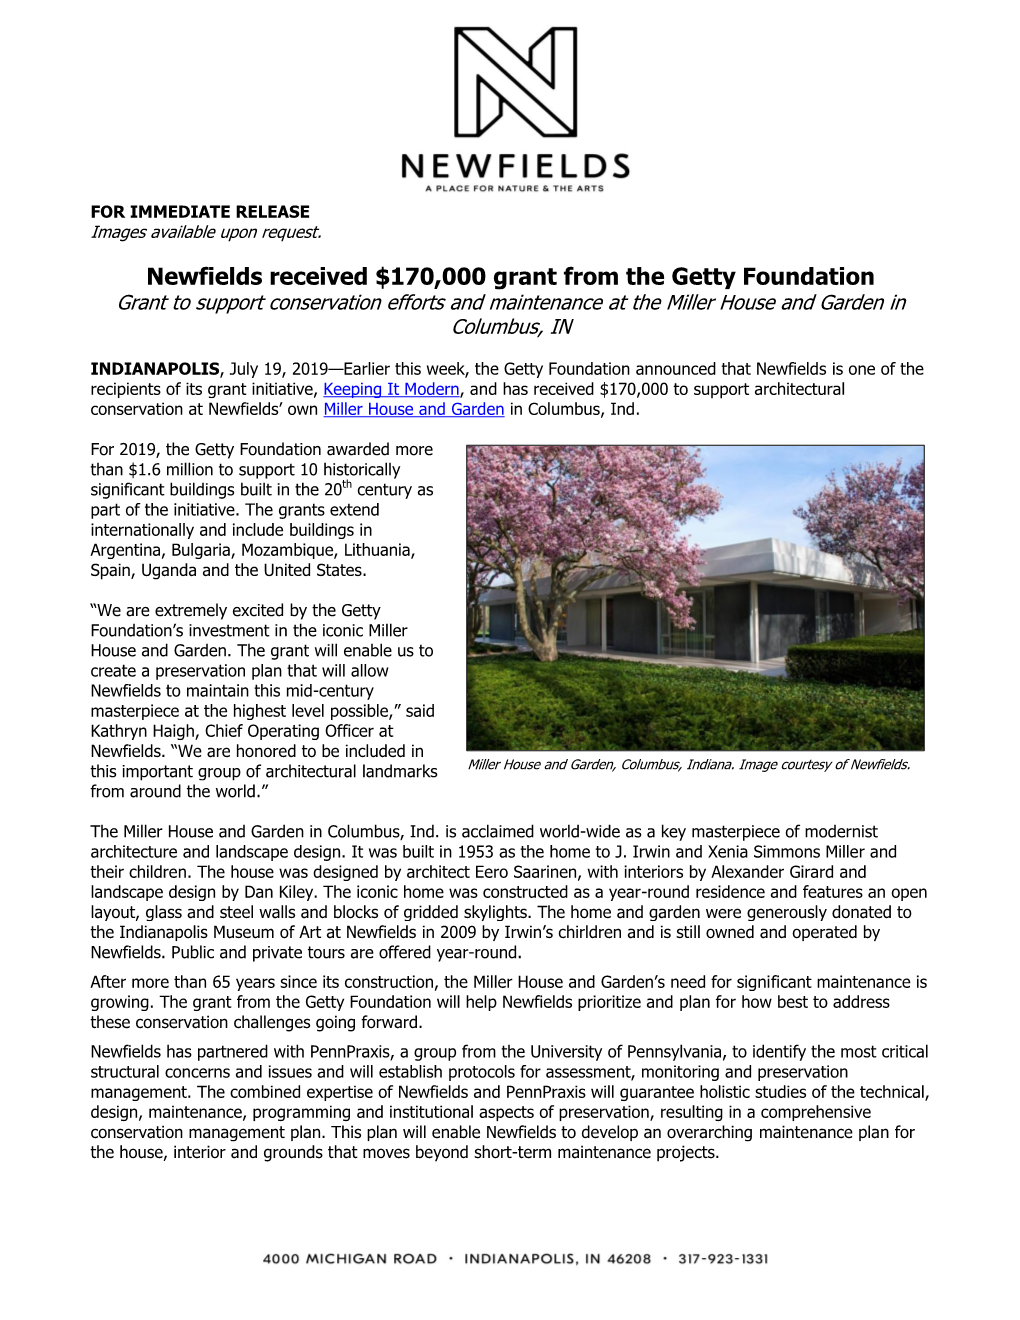 Newfields Received $170,000 Grant from the Getty Foundation Grant to Support Conservation Efforts and Maintenance at the Miller House and Garden in Columbus, IN